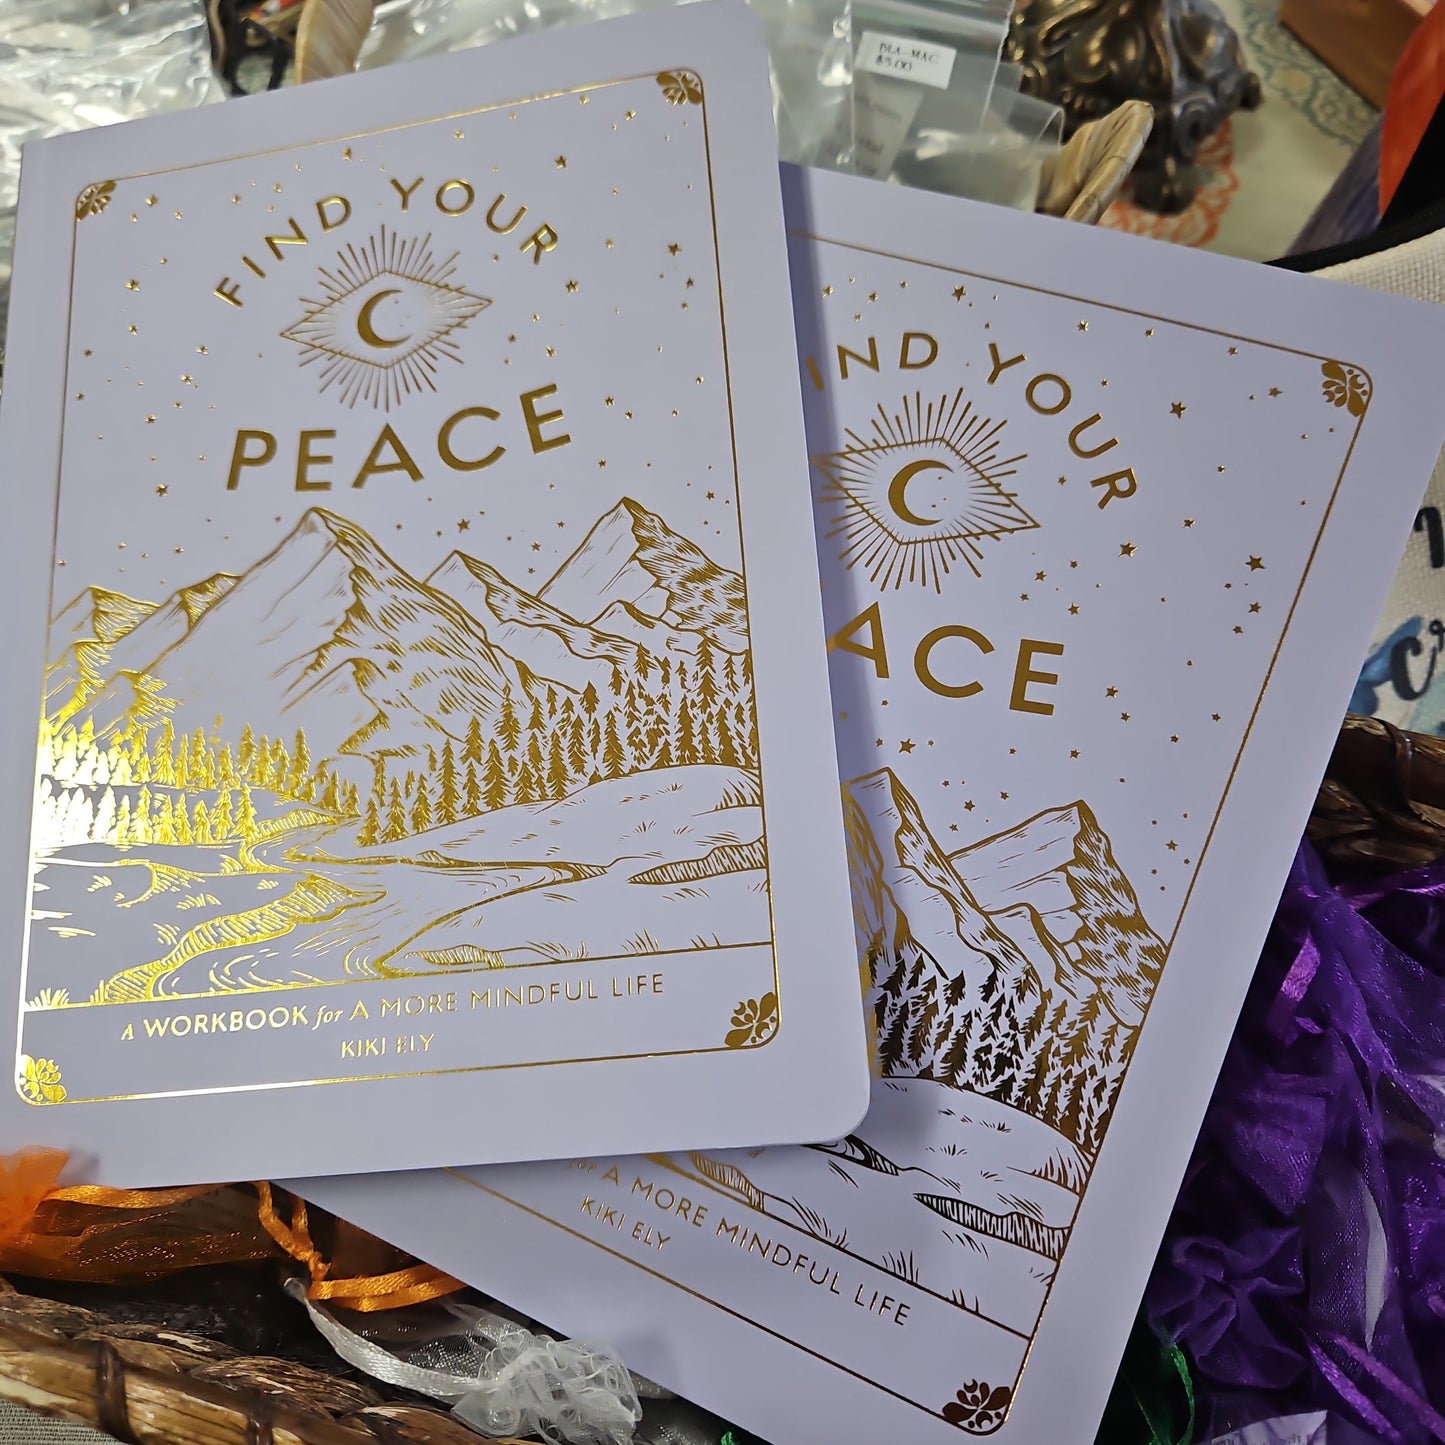 Find Your Peace  - A Workbook for a More Mindful Life